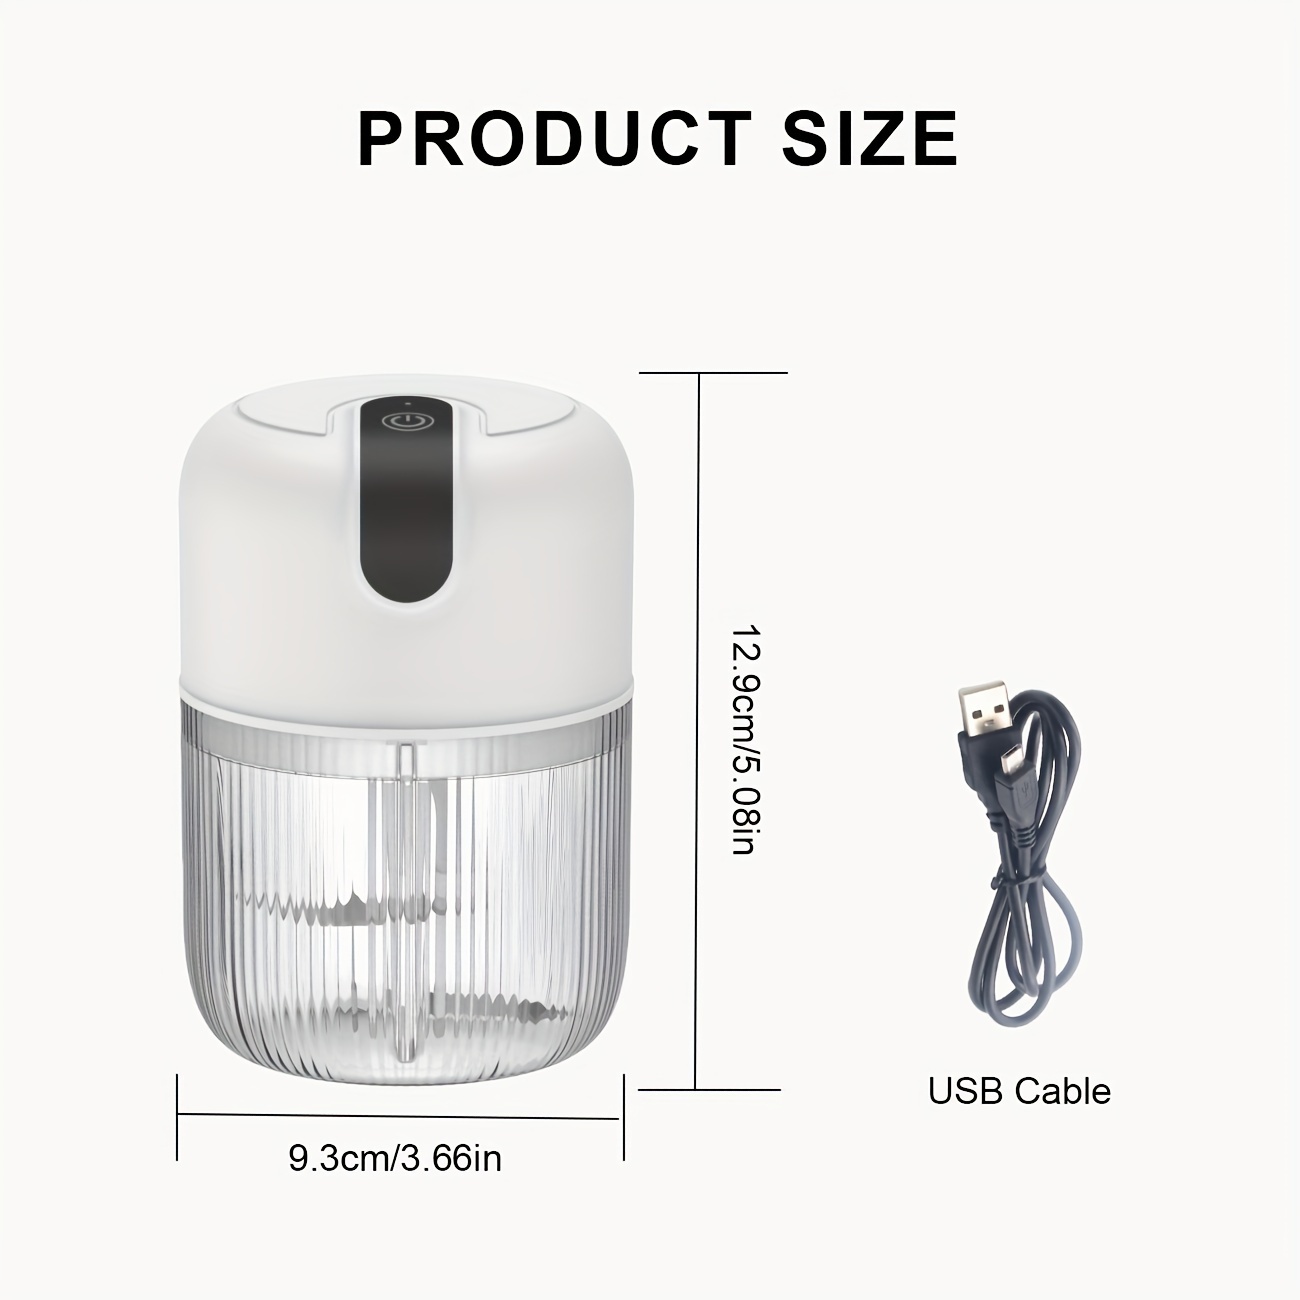 Electric Mini Garlic Chopper, 304 Stainless Steel Contact Food Grade  Material, Usb Rechargeable Portable Electric Food Chopper,wireless Small  Food Processor For Chopping Garlic, Ginger, Chili, Minced Meat, Onion, Etc  Kitchen Tools 